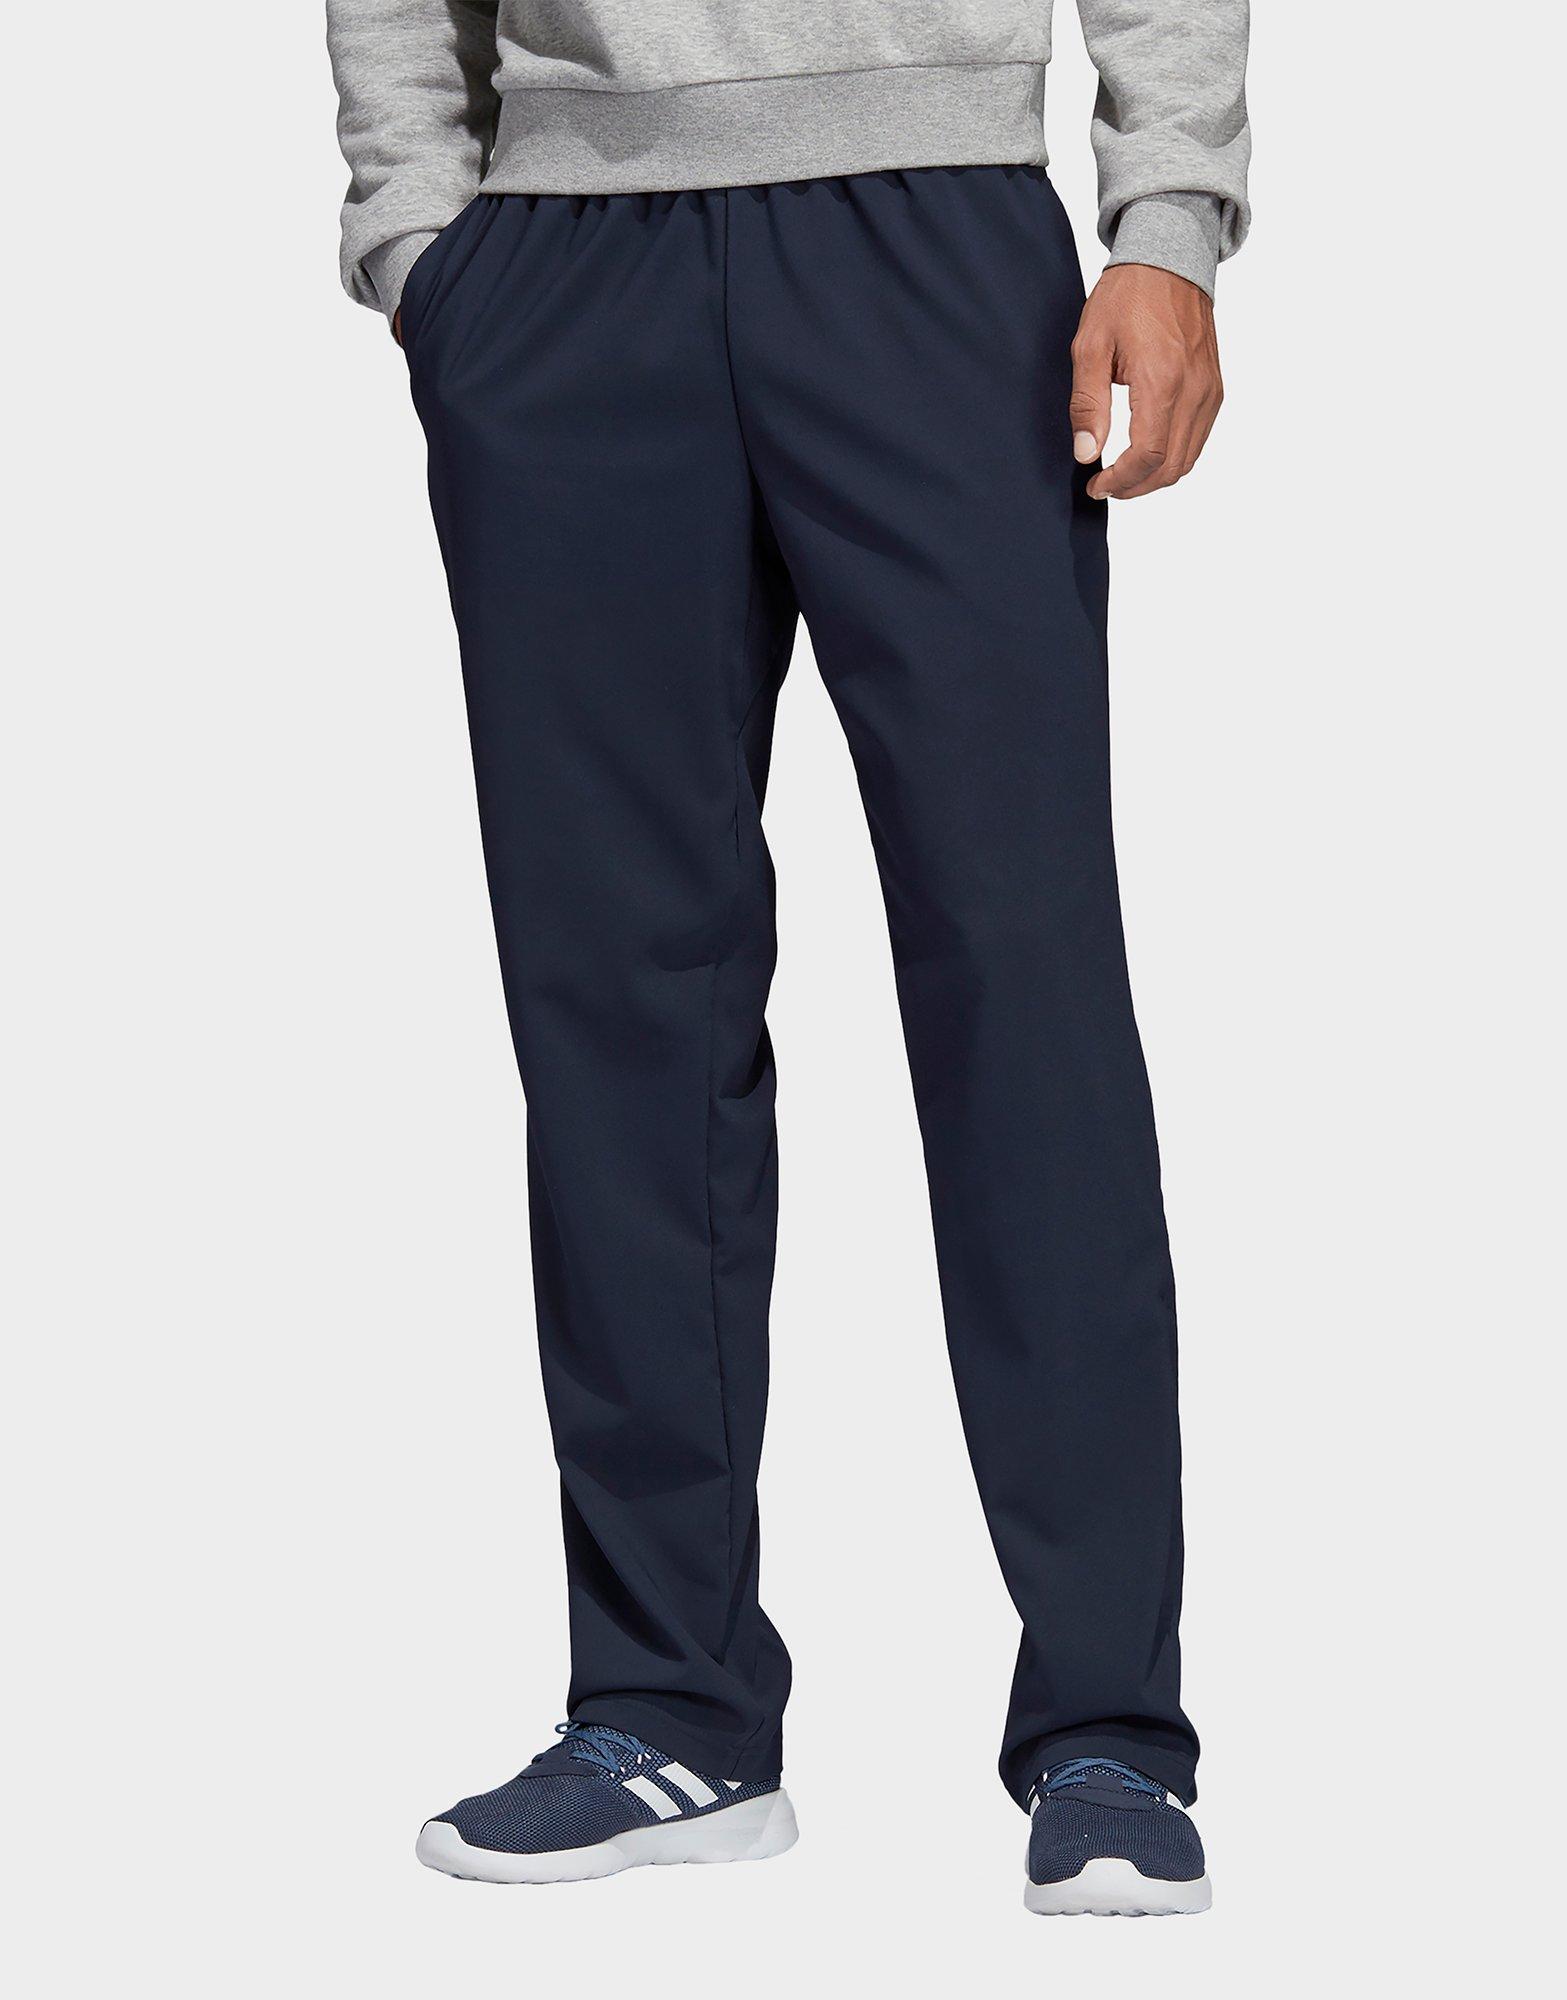 adidas stanford trousers